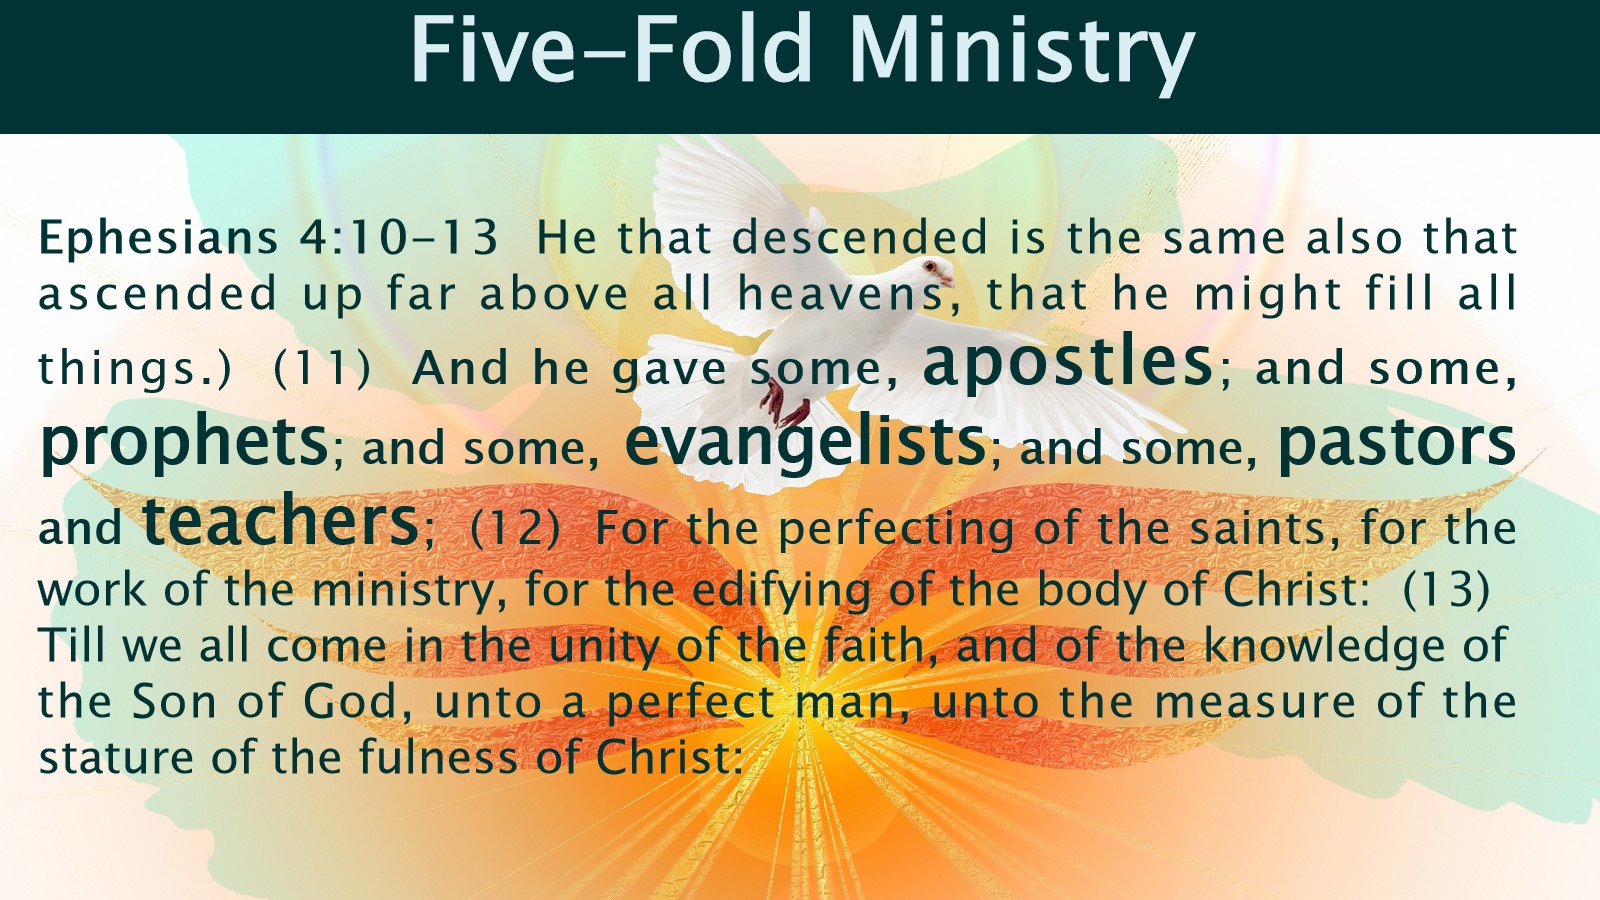 A Closer Look at The Five-Fold Ministry